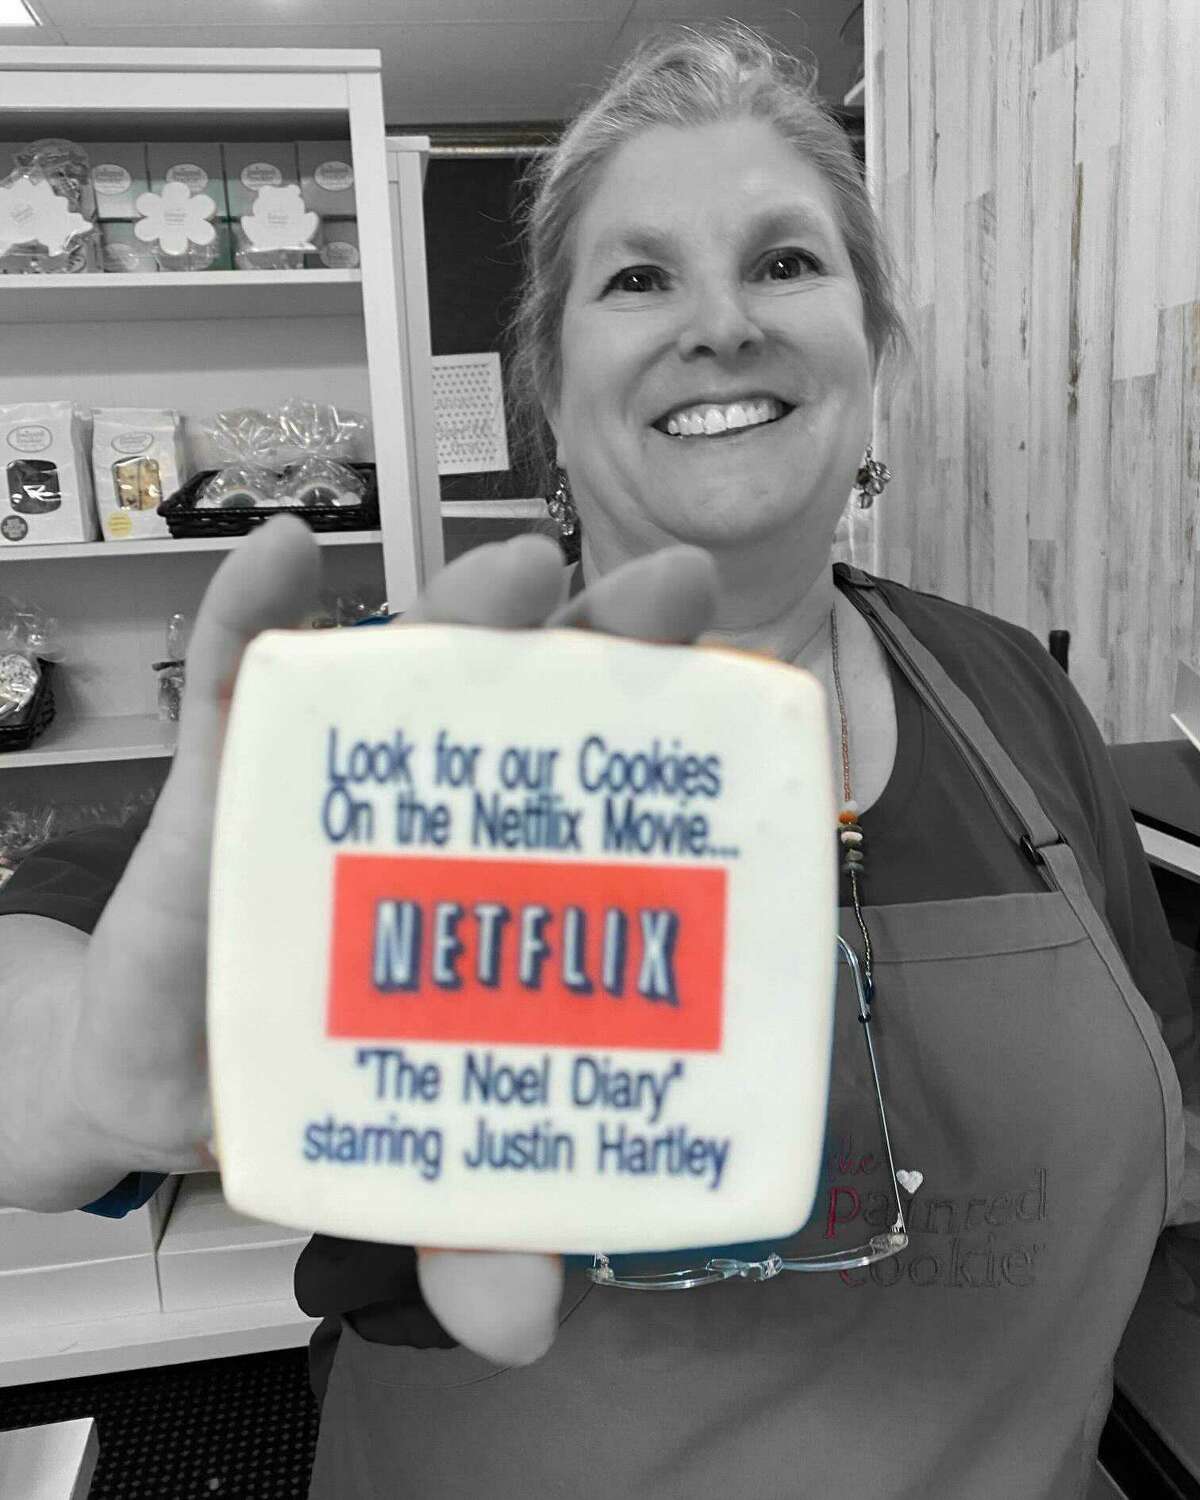 Susan Schmitt, owner of The Painted Cookie in Wilton, Conn., was contacted by a prop manager for the Netflix movie, "The Noel Diary," which has been filming in Connecticut with Justin Hartley and Treat Williams. 